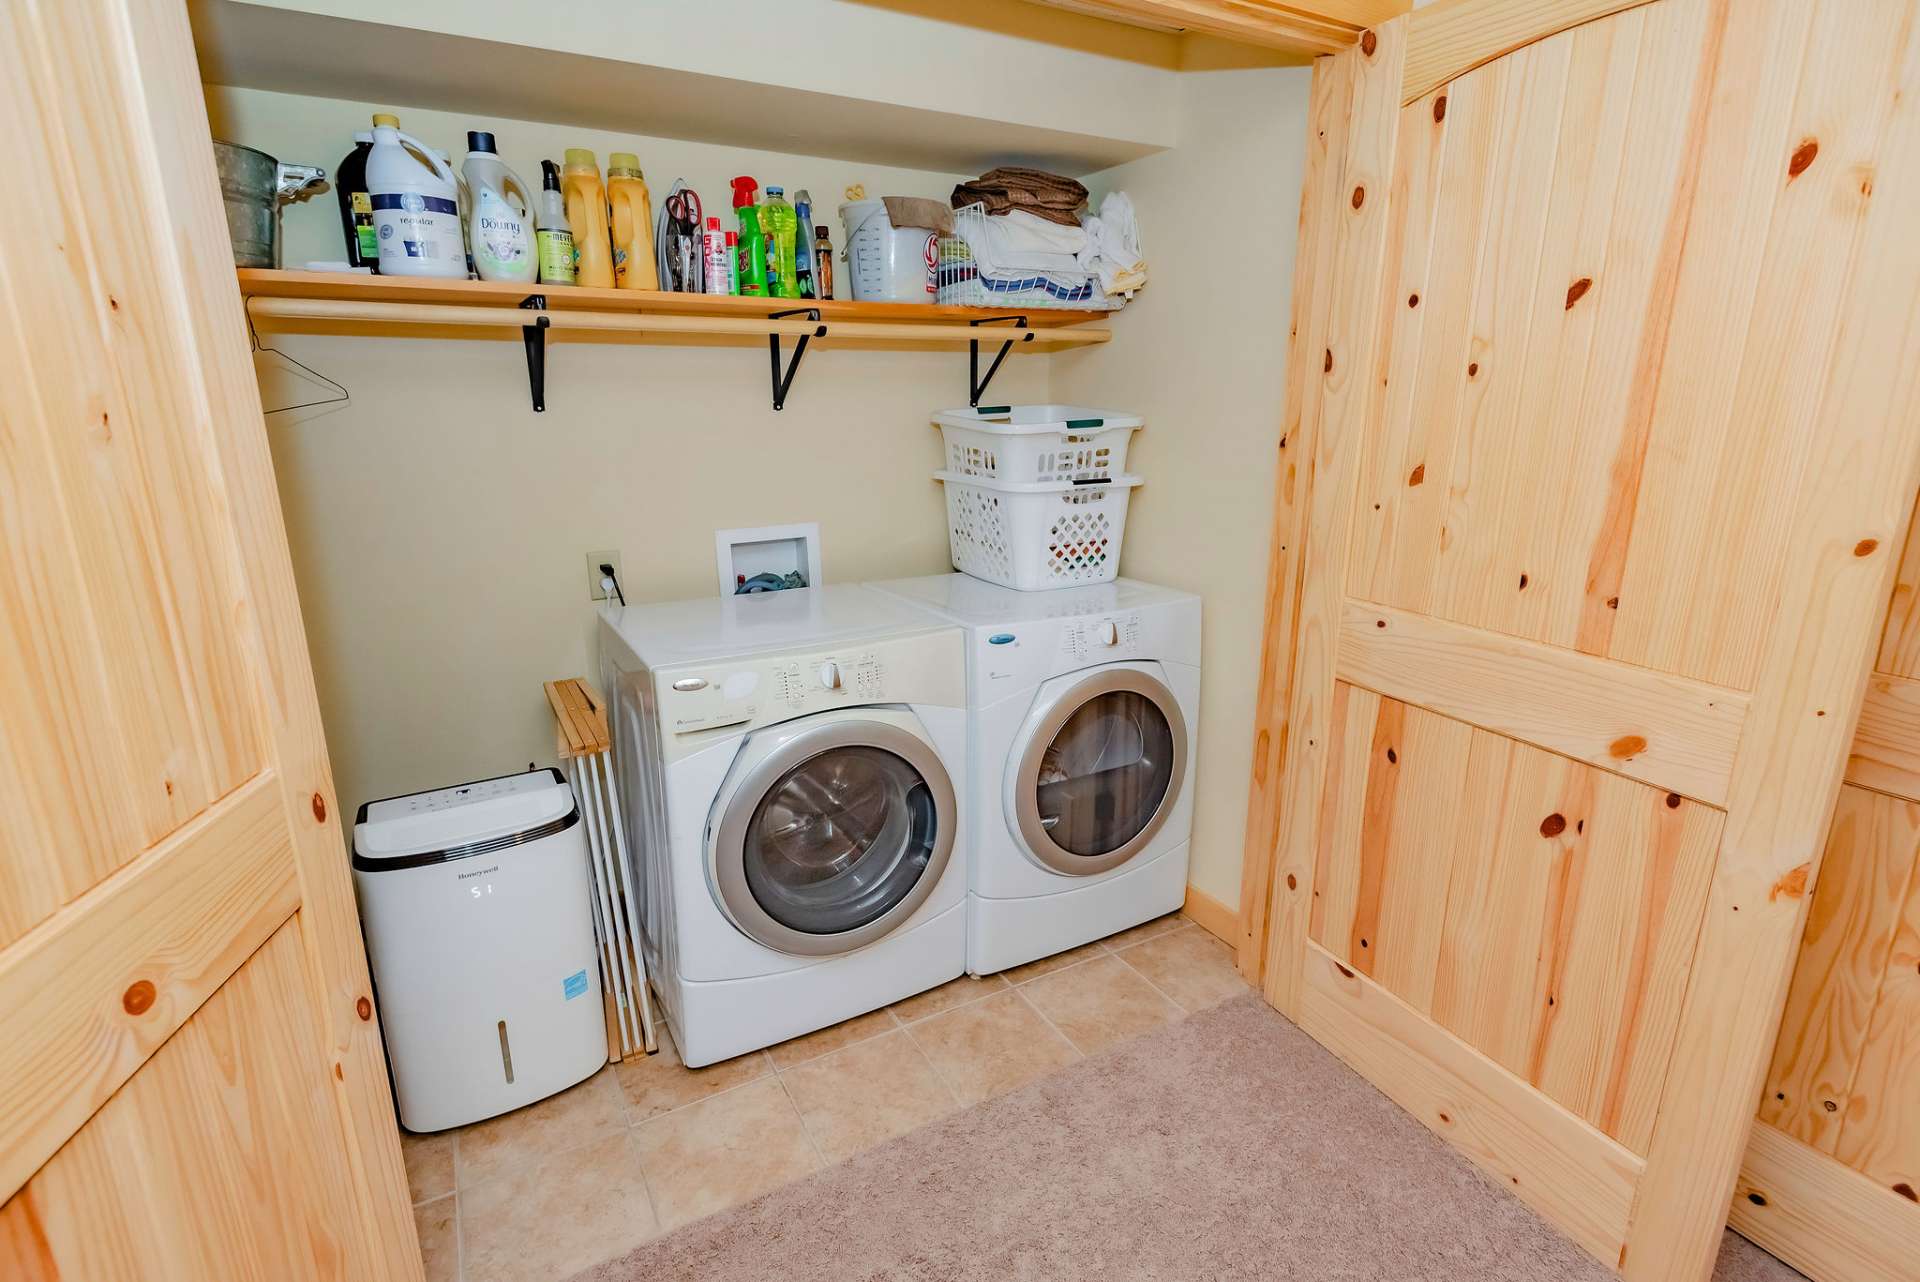 A laundry space completes the lower level.